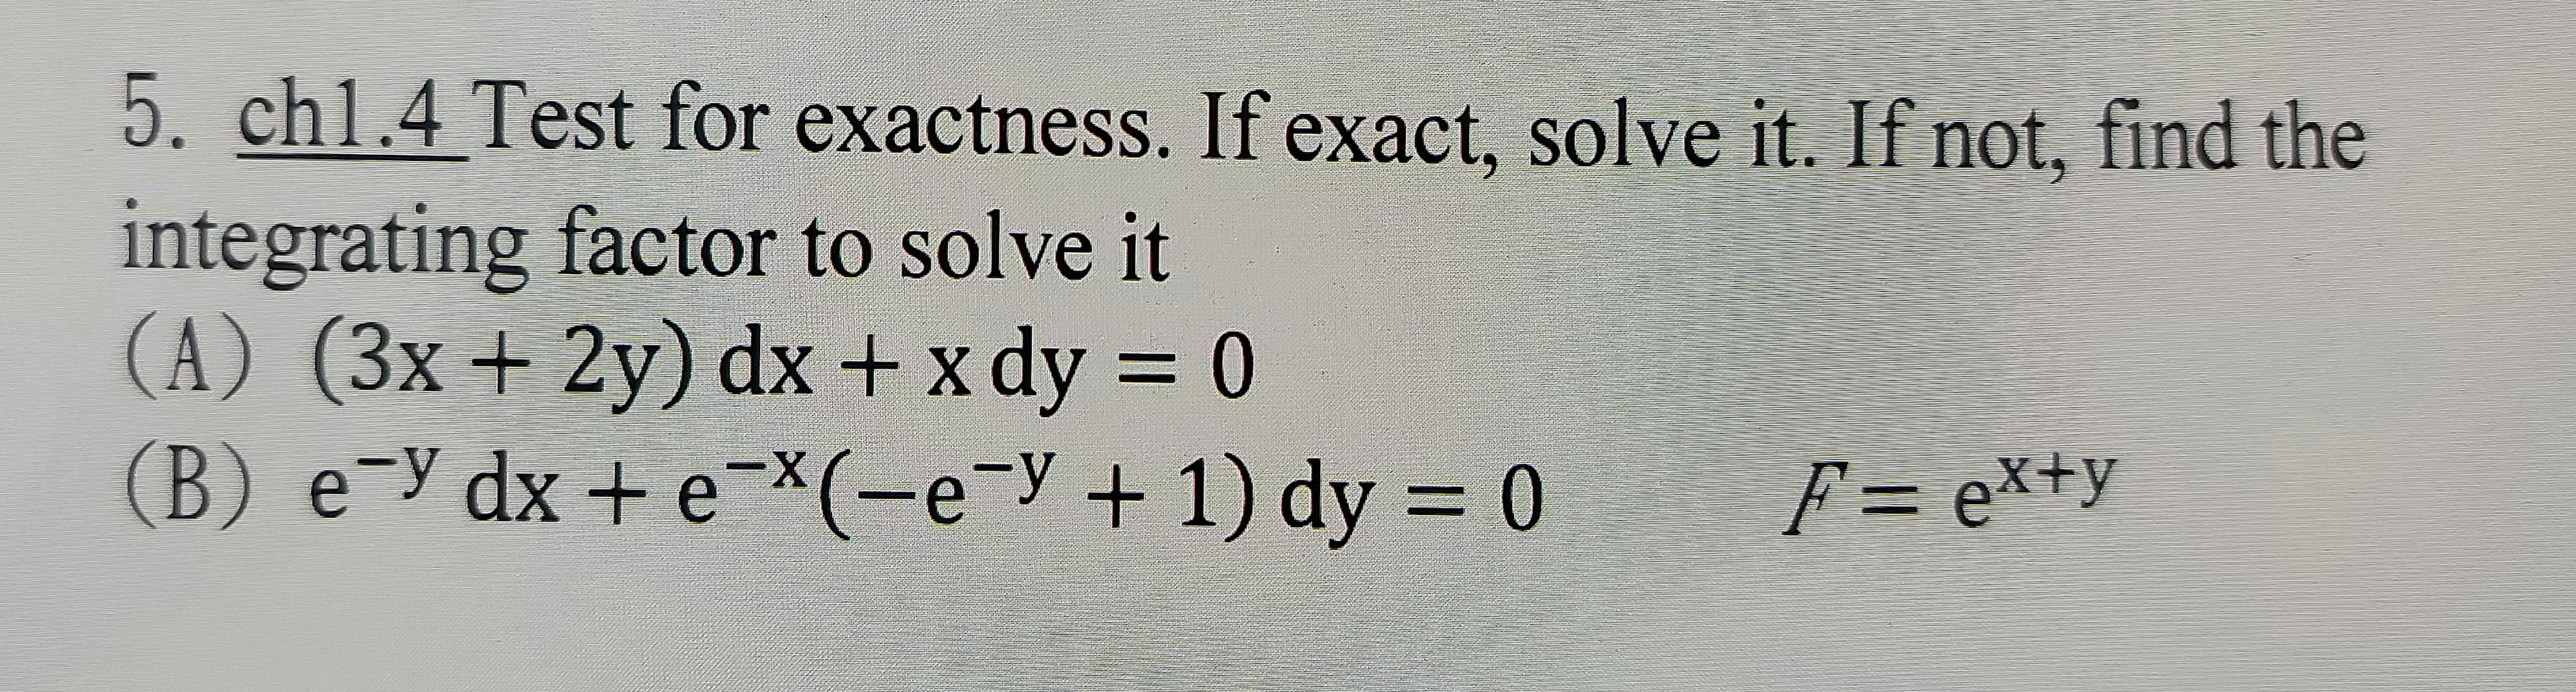 5. chl.4 Test for exactness. If exact, solve it. If not, find the
integrating factor to solve it
(A) (3x + 2y) dx + x dy = 0
(B) e-y dx + e-*(-e-y + 1) dy = 0
F = ex+y
